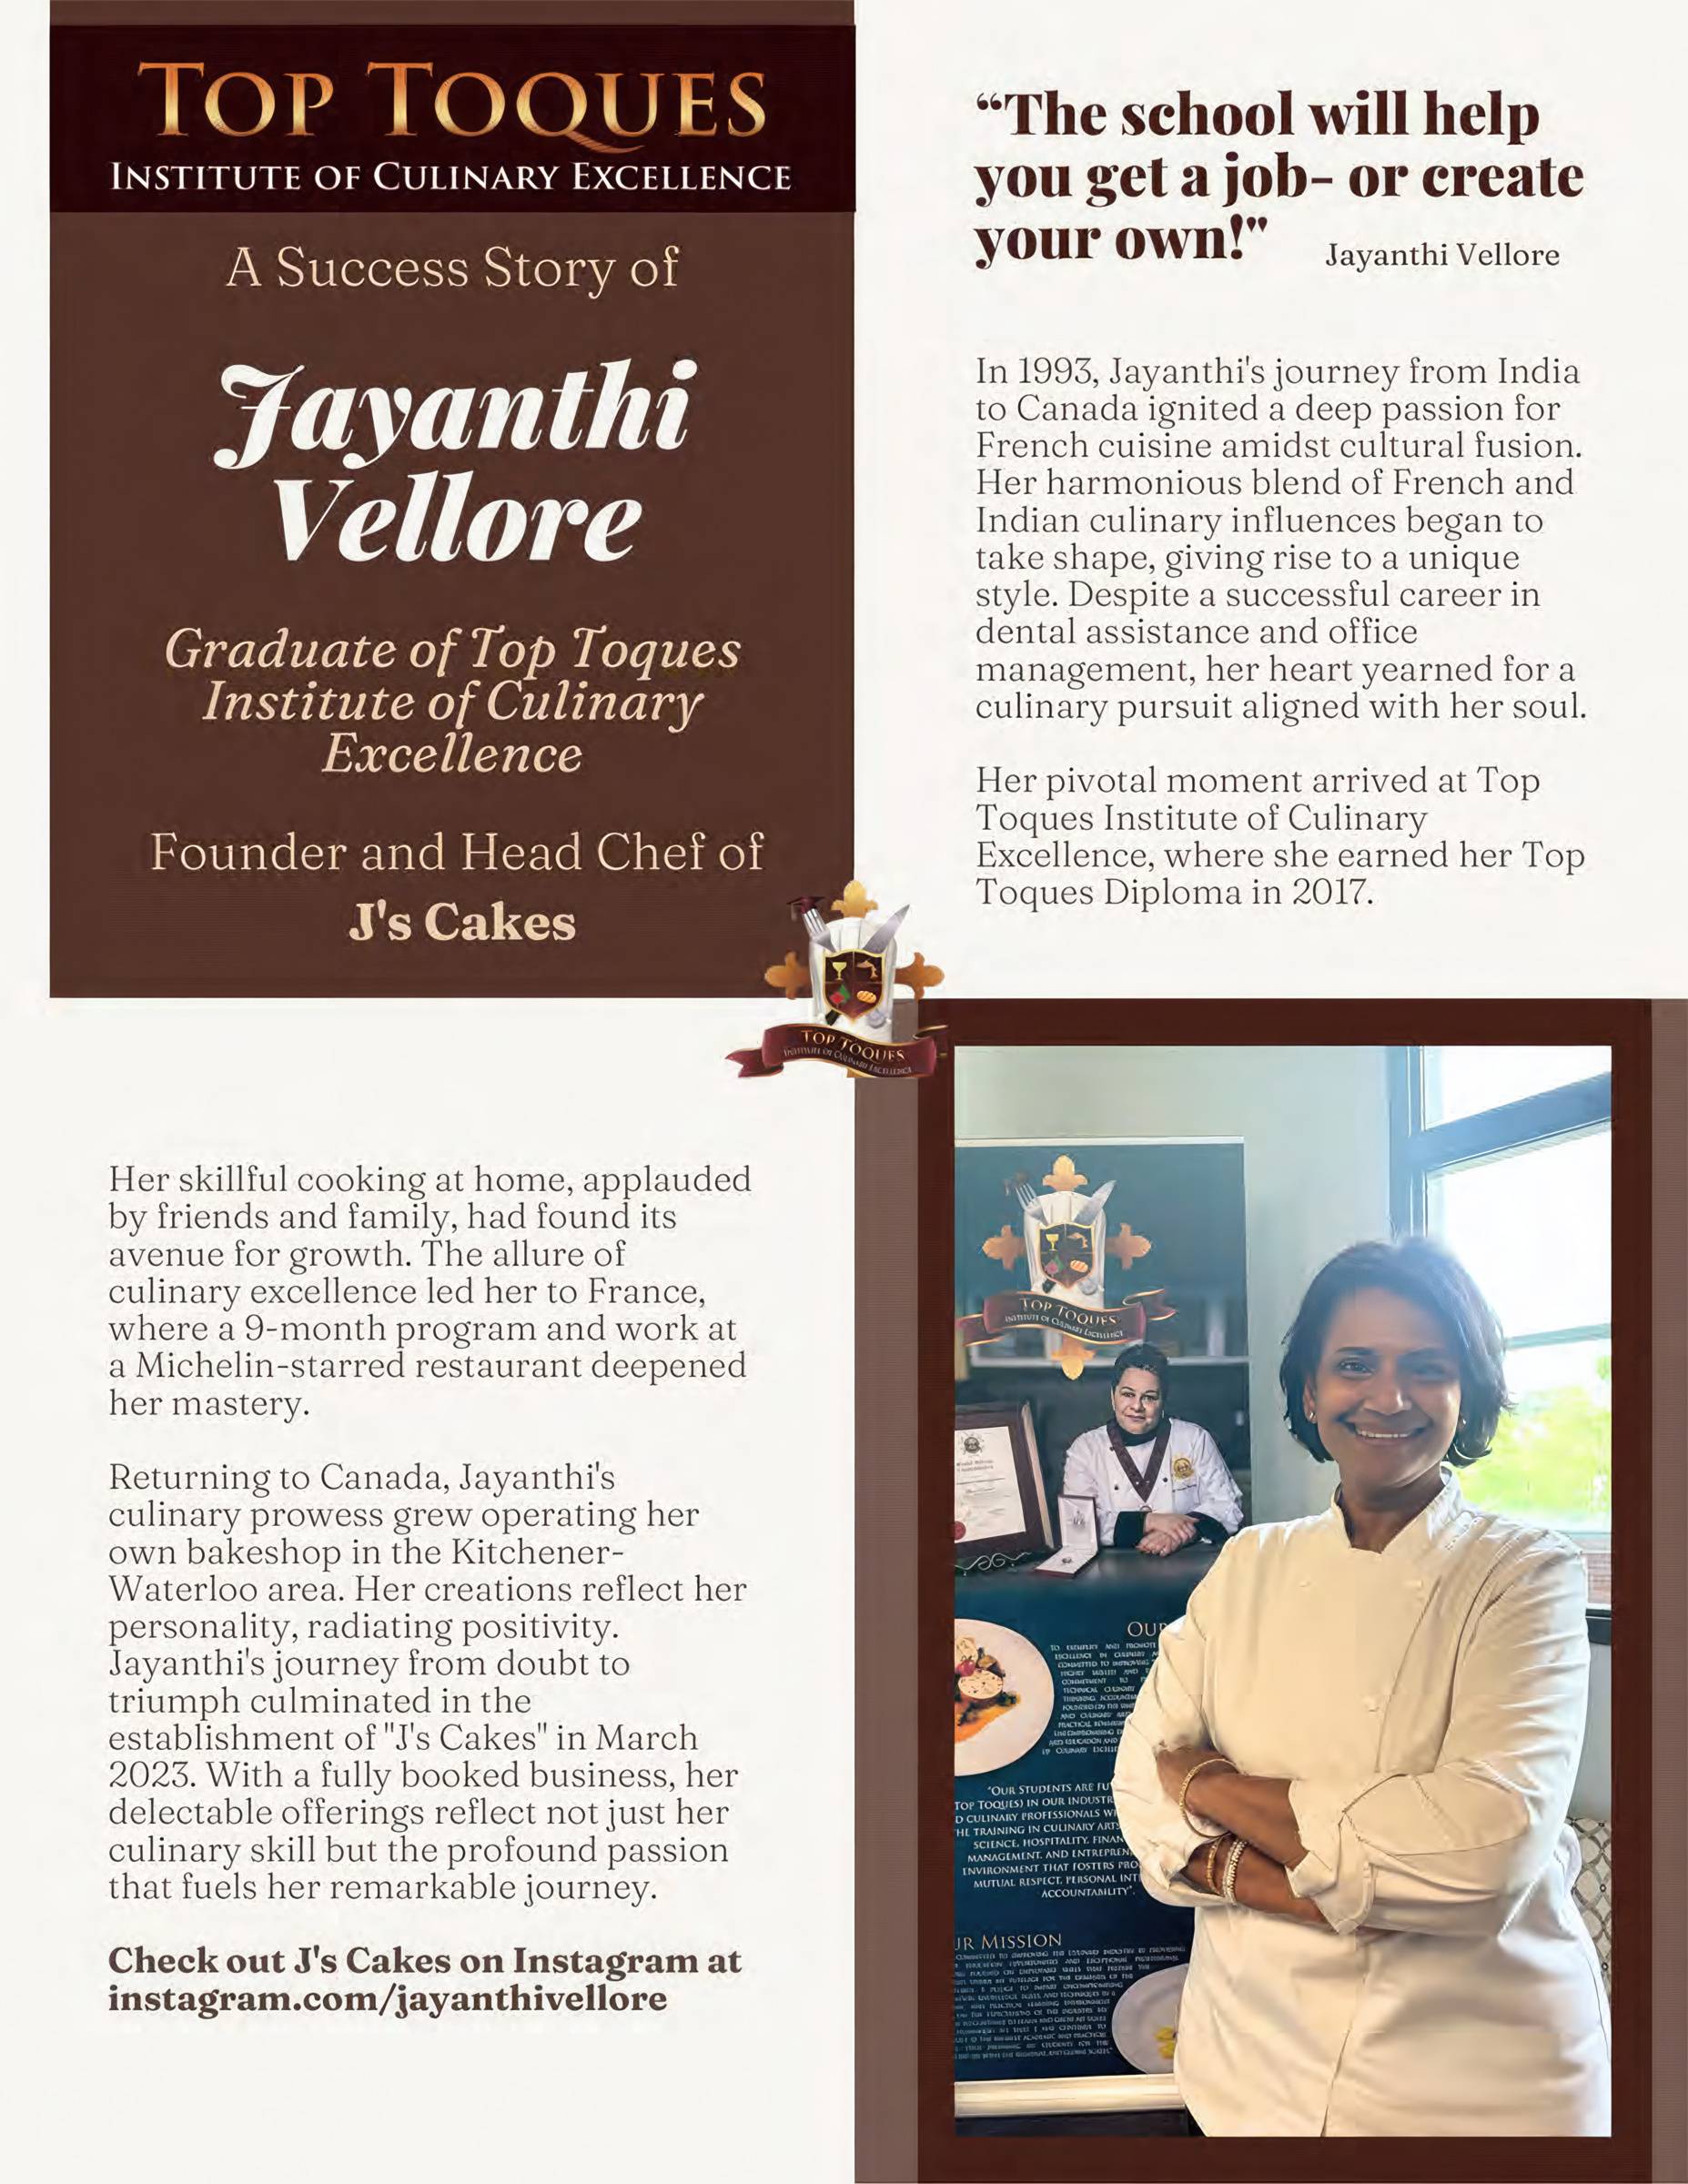 Student Success Story - Jayanthi Vellore - Image - Top Toques Institute of Culinary Excellence